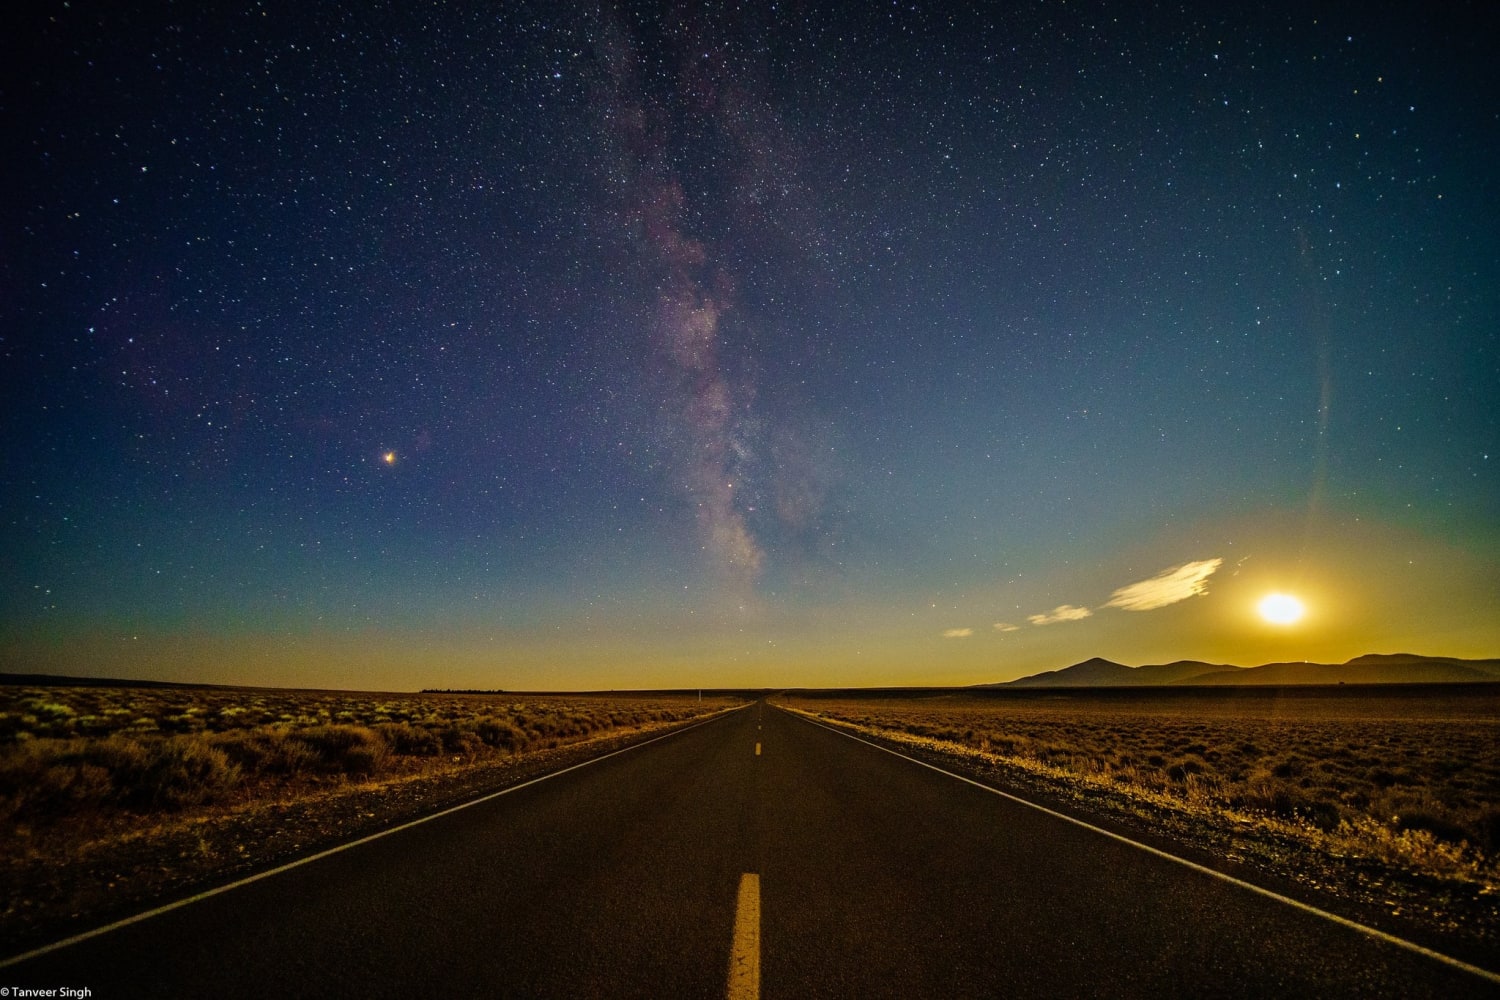 I love going to dark sites to chase the milky way - Highway to heaven - East Oregon